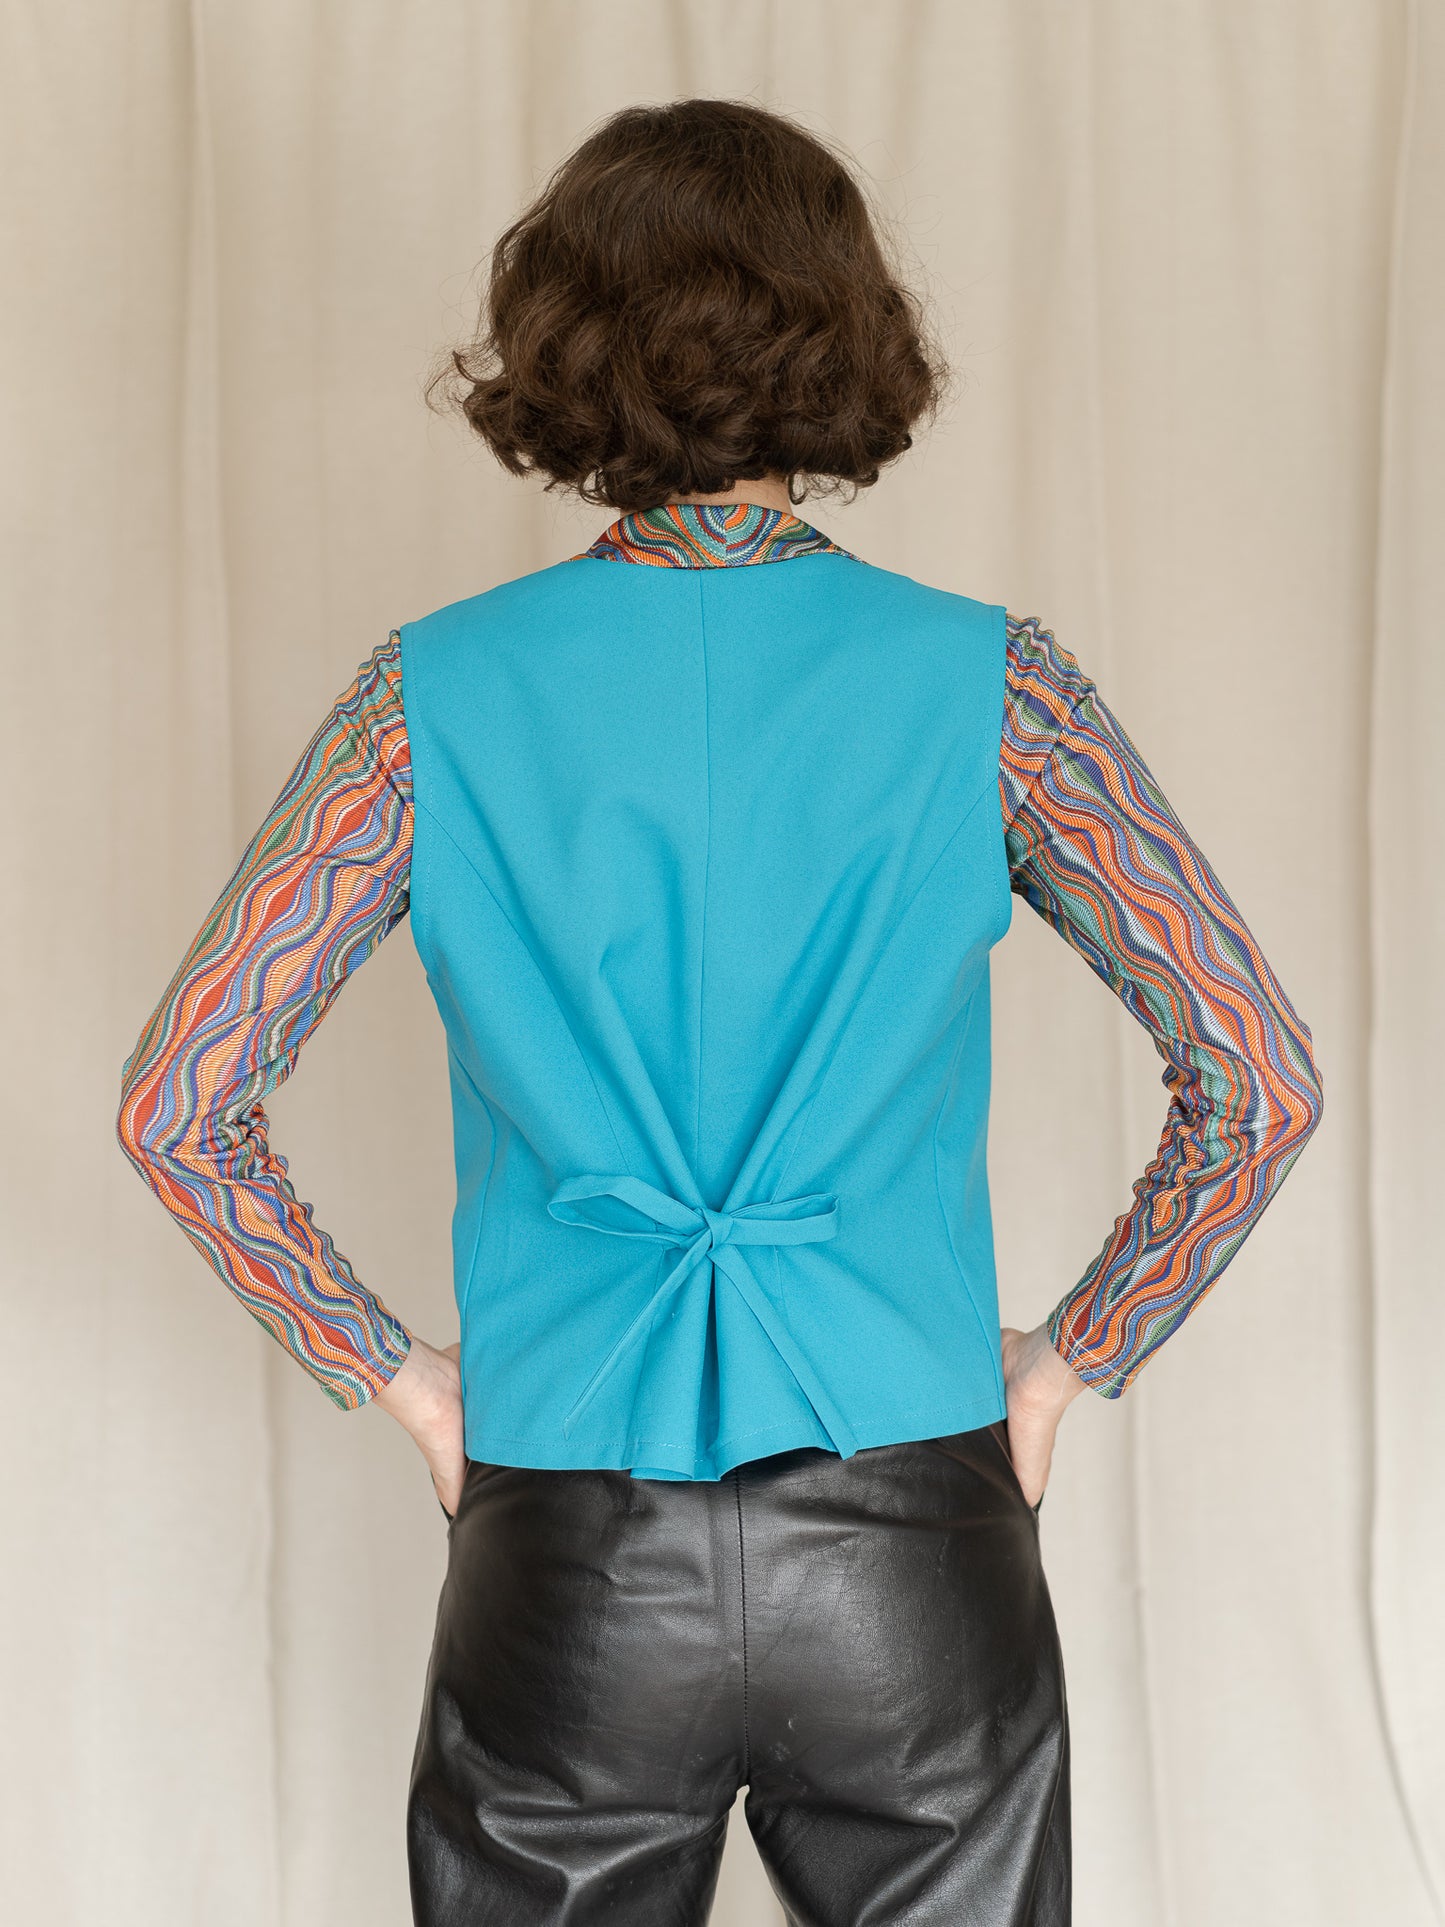 Vintage Handmade Turquoise Vest With A Back Tie (M)